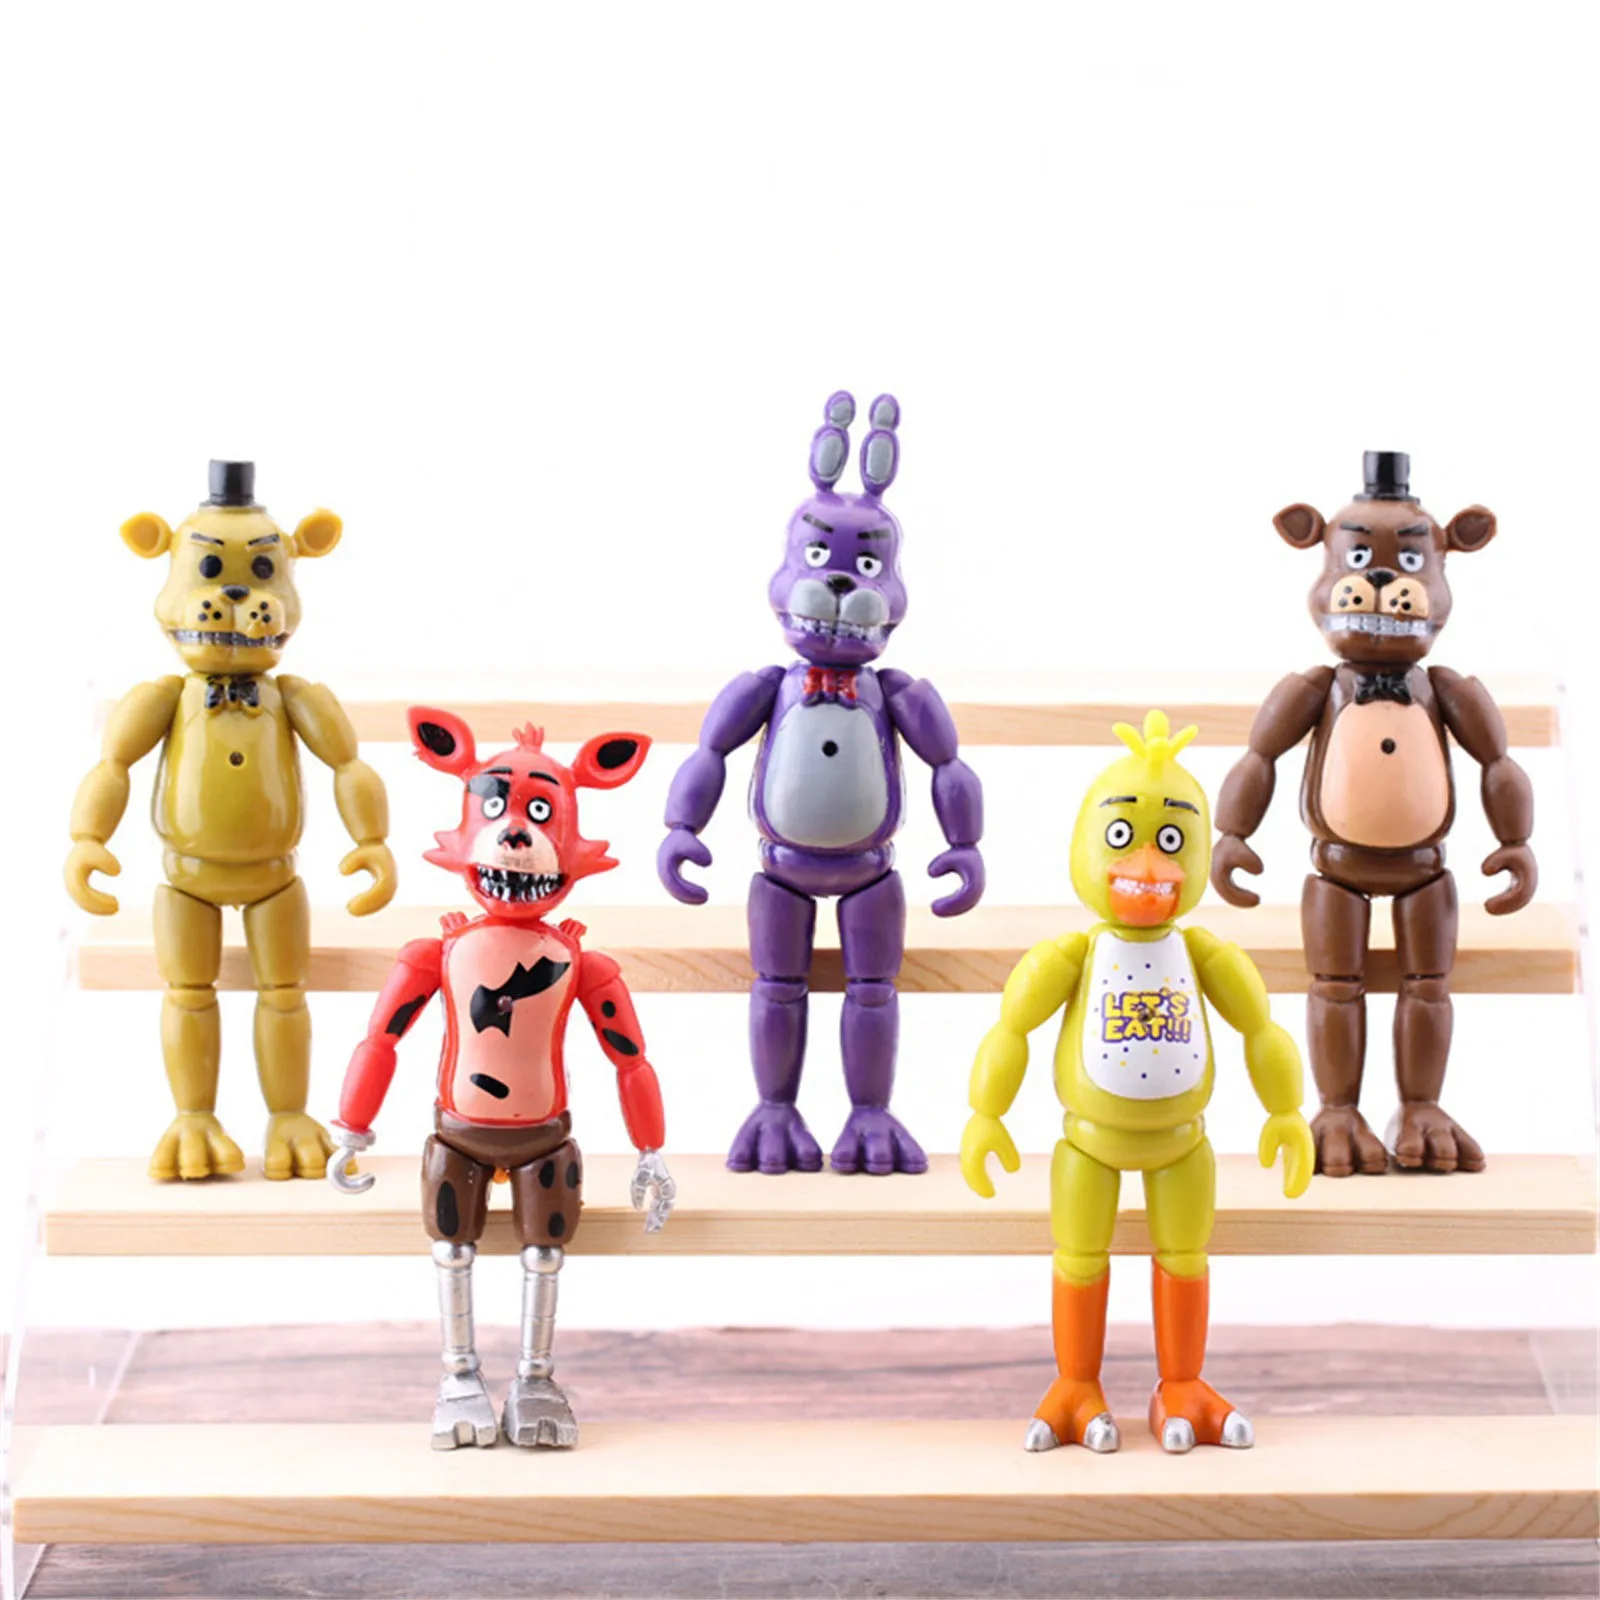 Sae20d923e9cb4be891218d98adea00b57 - Five Nights At Freddys Store